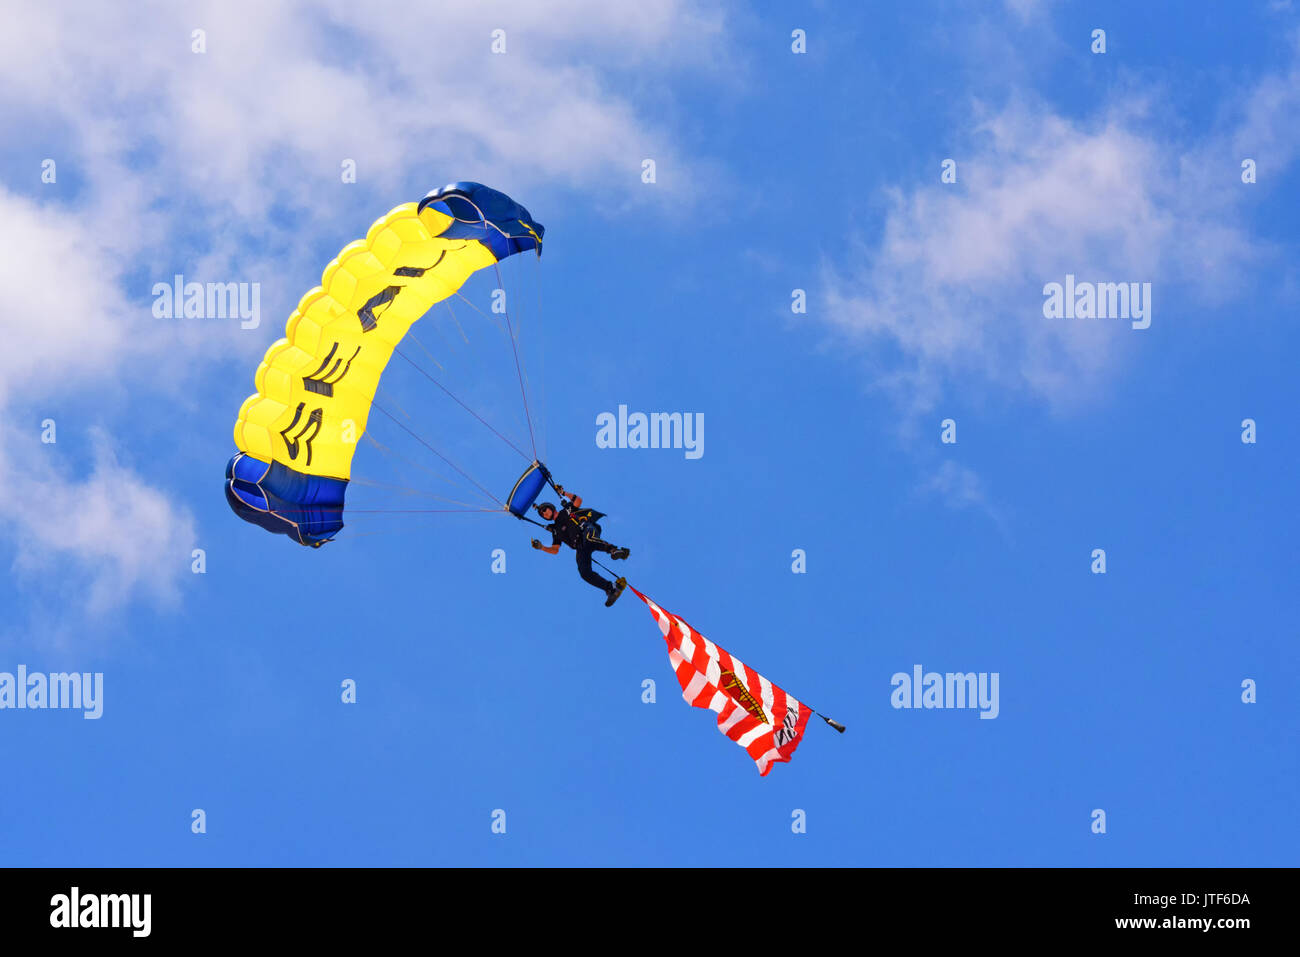 CHEYENNE, WYOMING, USA - JULY 27, 2017: US Navy Leapfrog team of skydivers opens the annual Frontier Days Rodeo. The Gadsden flag 'DON'T TREAD ON ME' Stock Photo